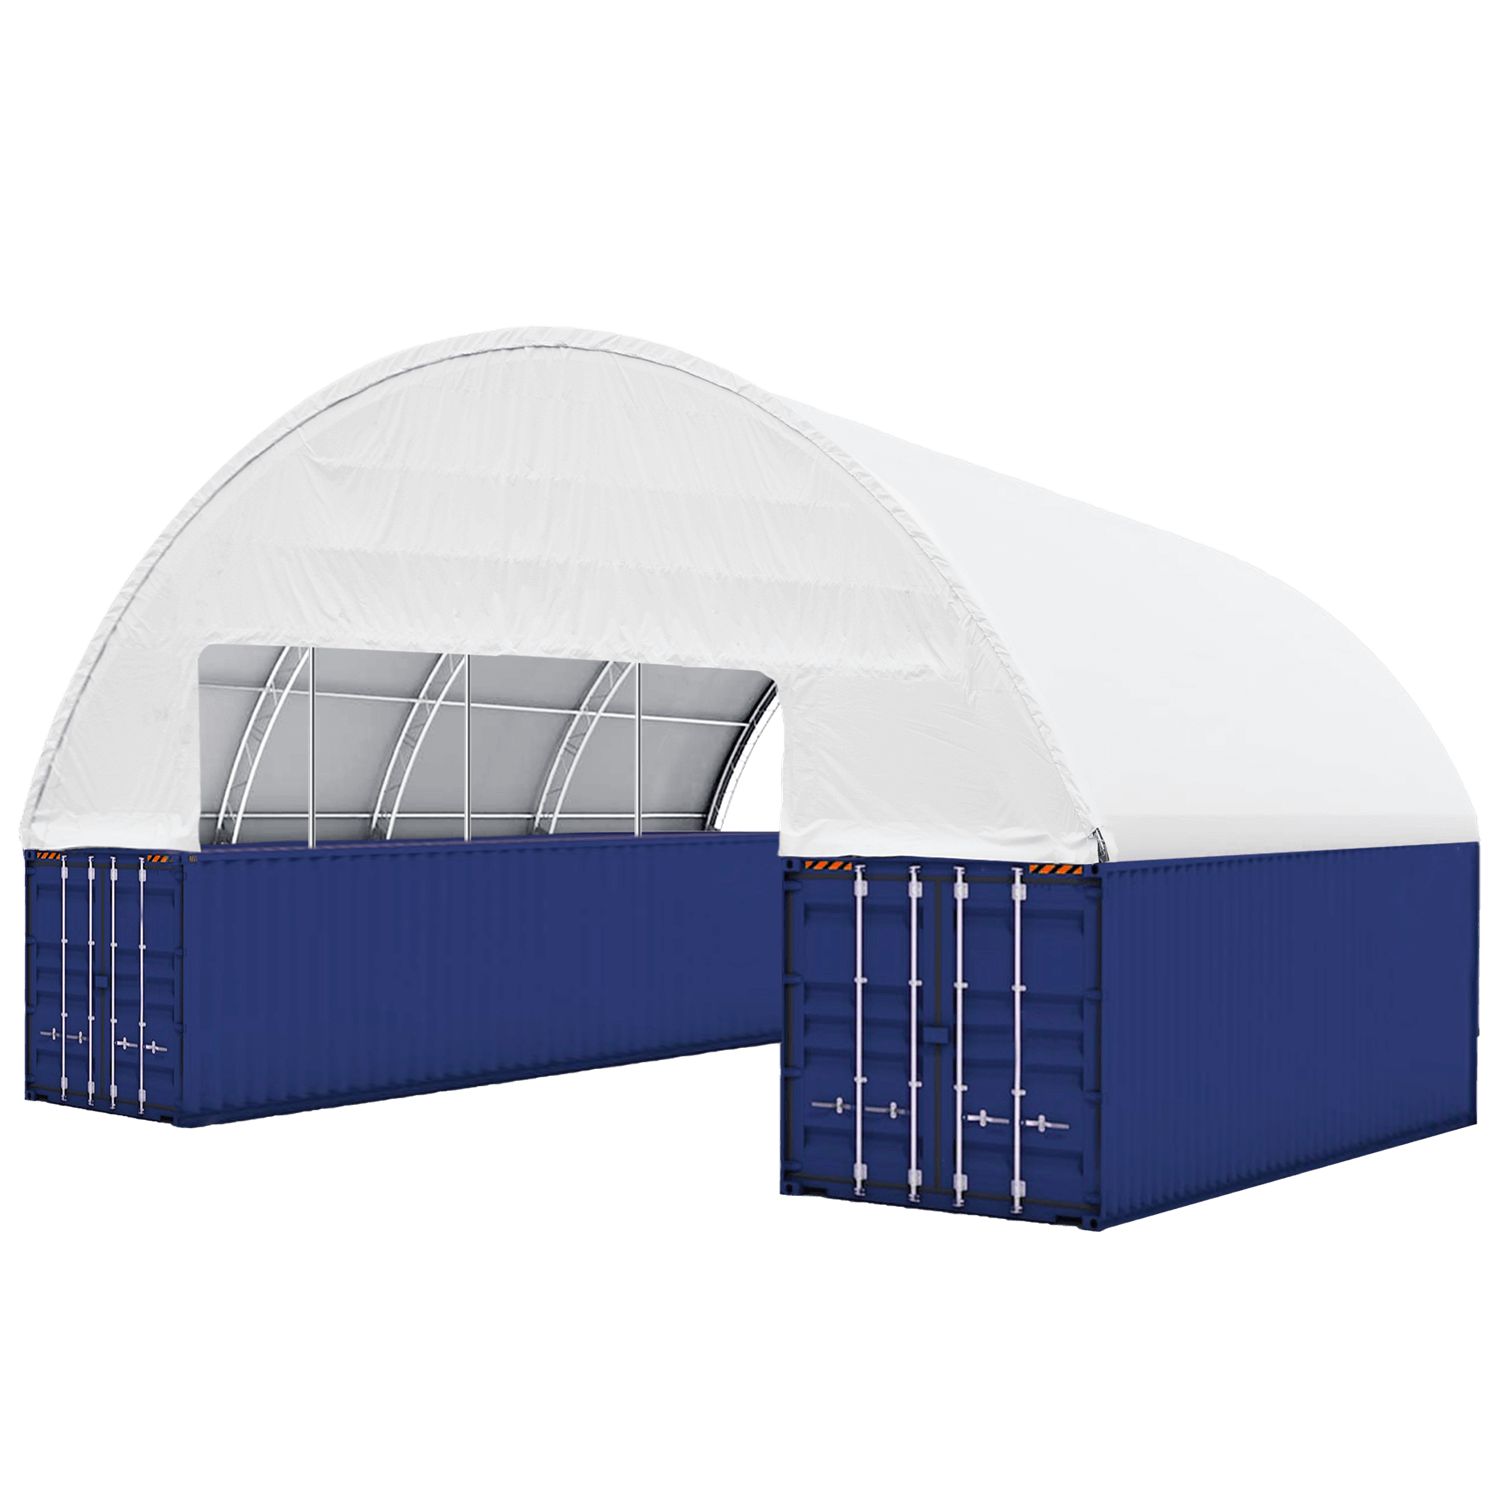 Double Truss Shipping Container Canopy Shelter 60'x40'x15'